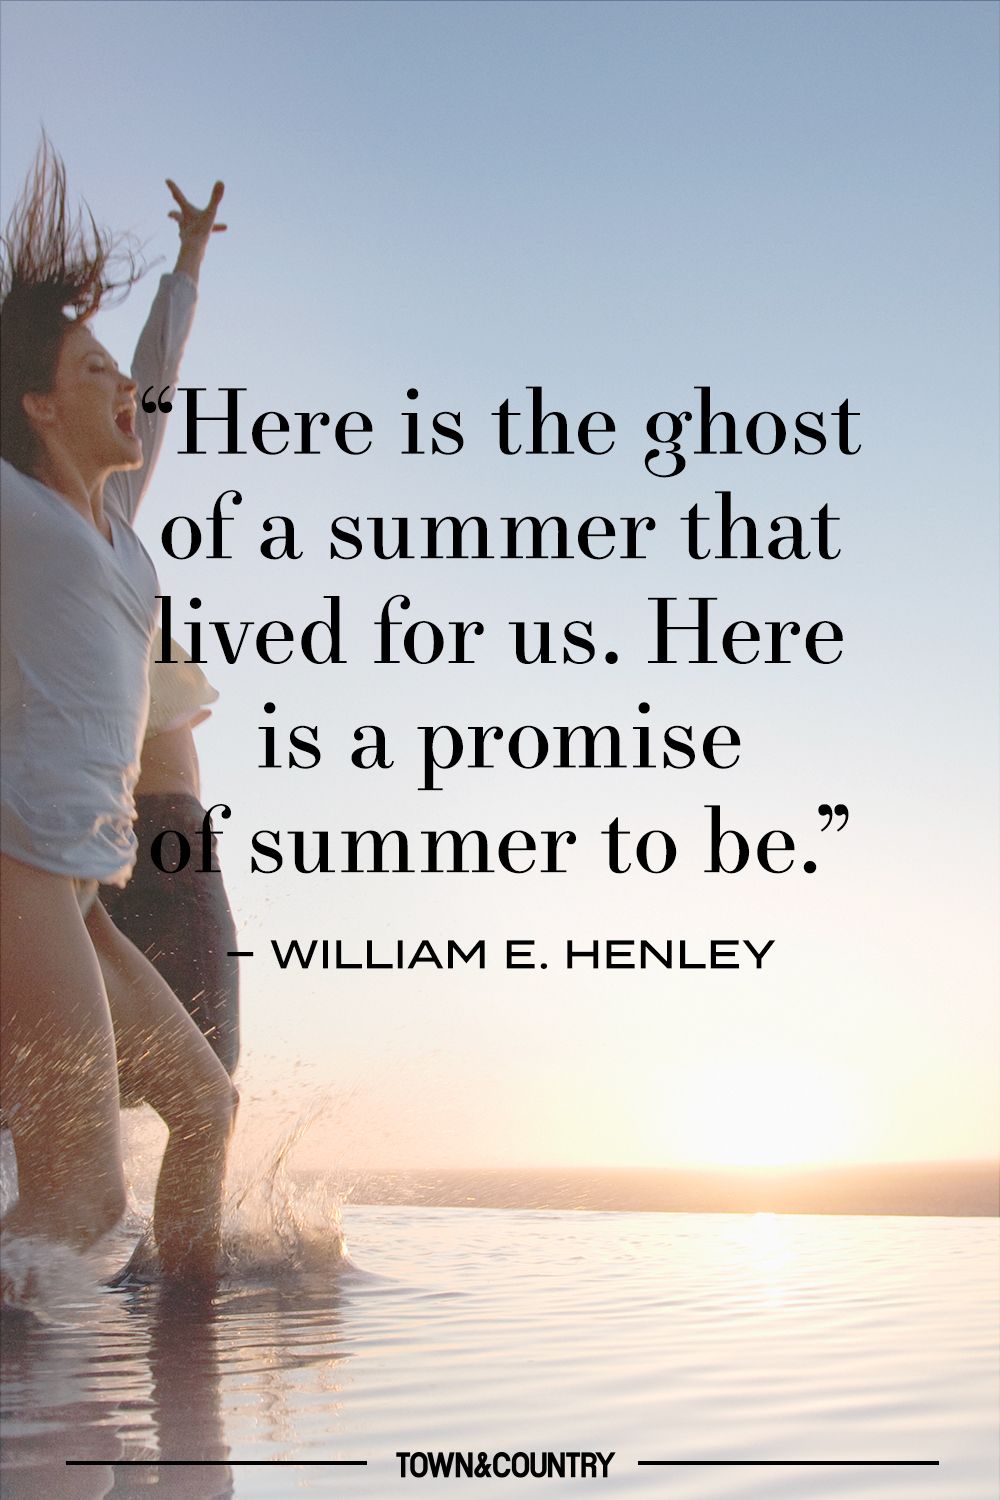 Best End of Summer Quotes Quotes About the Last Days of Summer